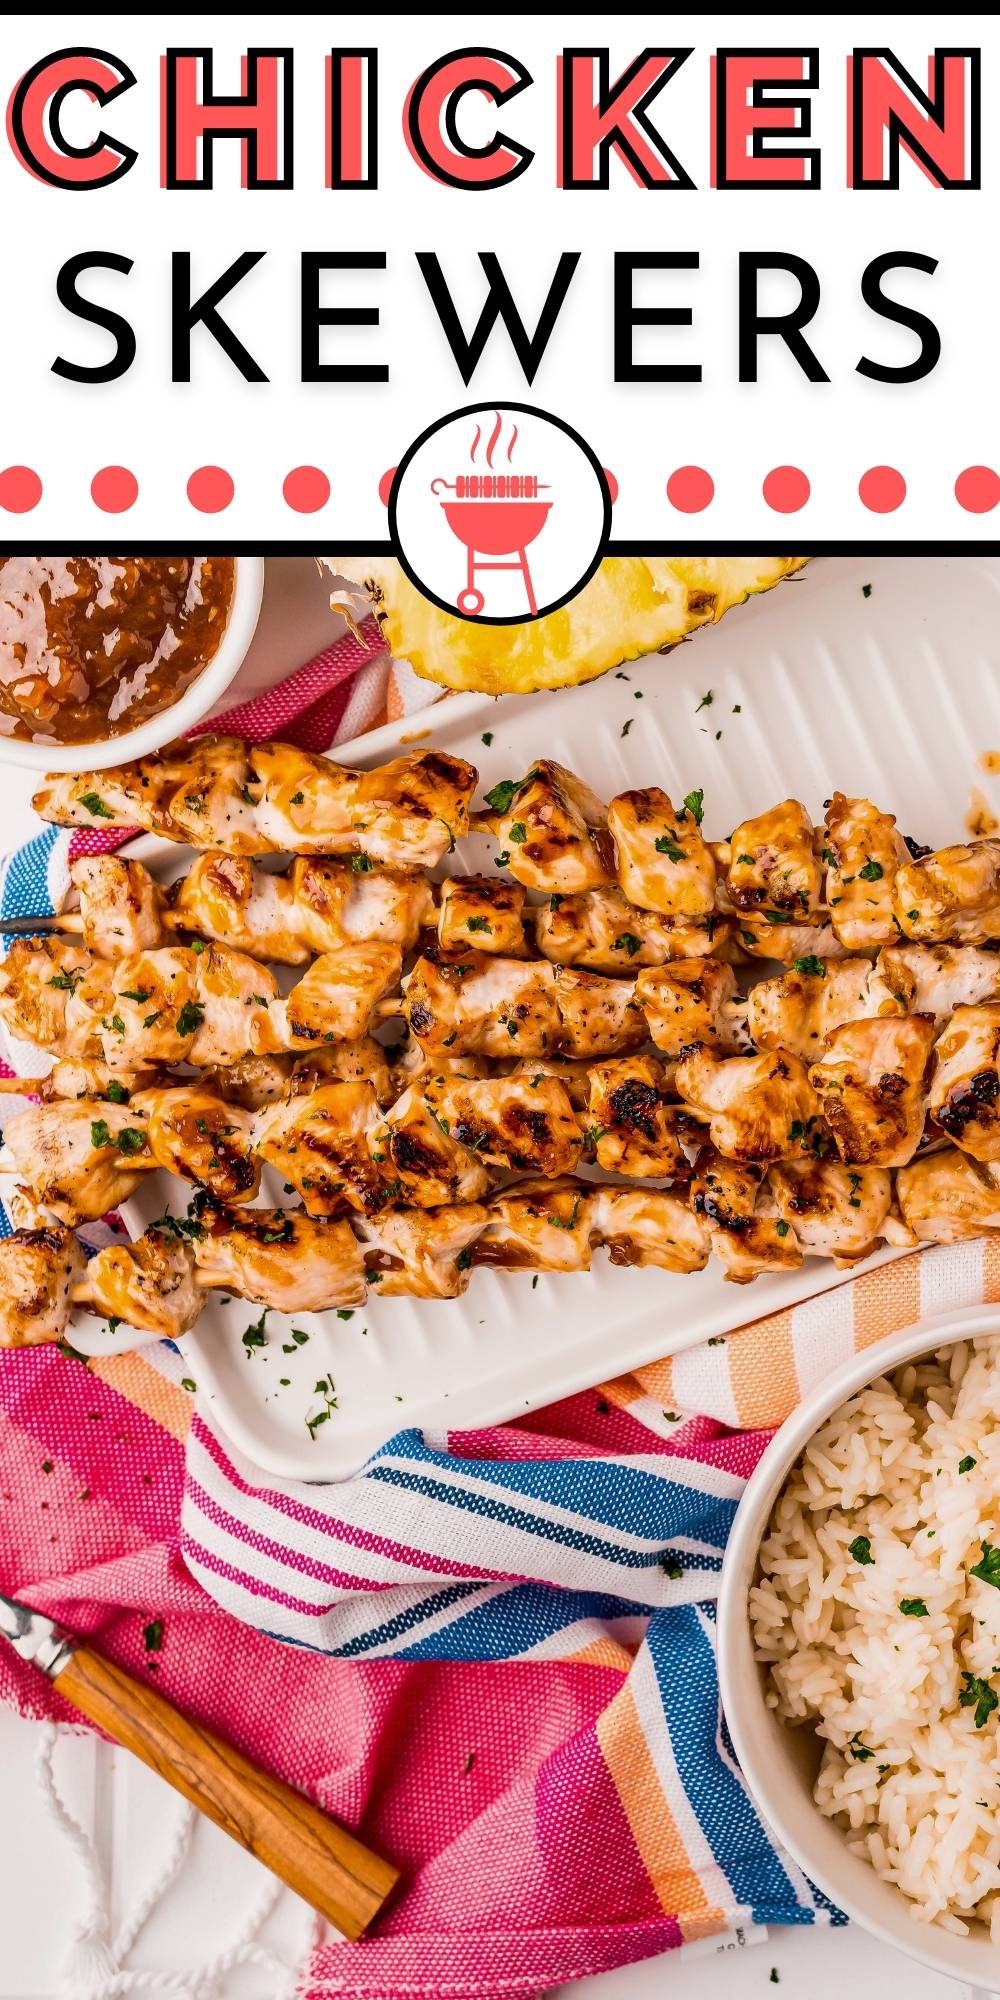 This Grilled Chicken Skewers Recipe is covered with pineapple teriyaki sauce that takes them to another level. It’s an easy grilling recipe. via @foodfolksandfun